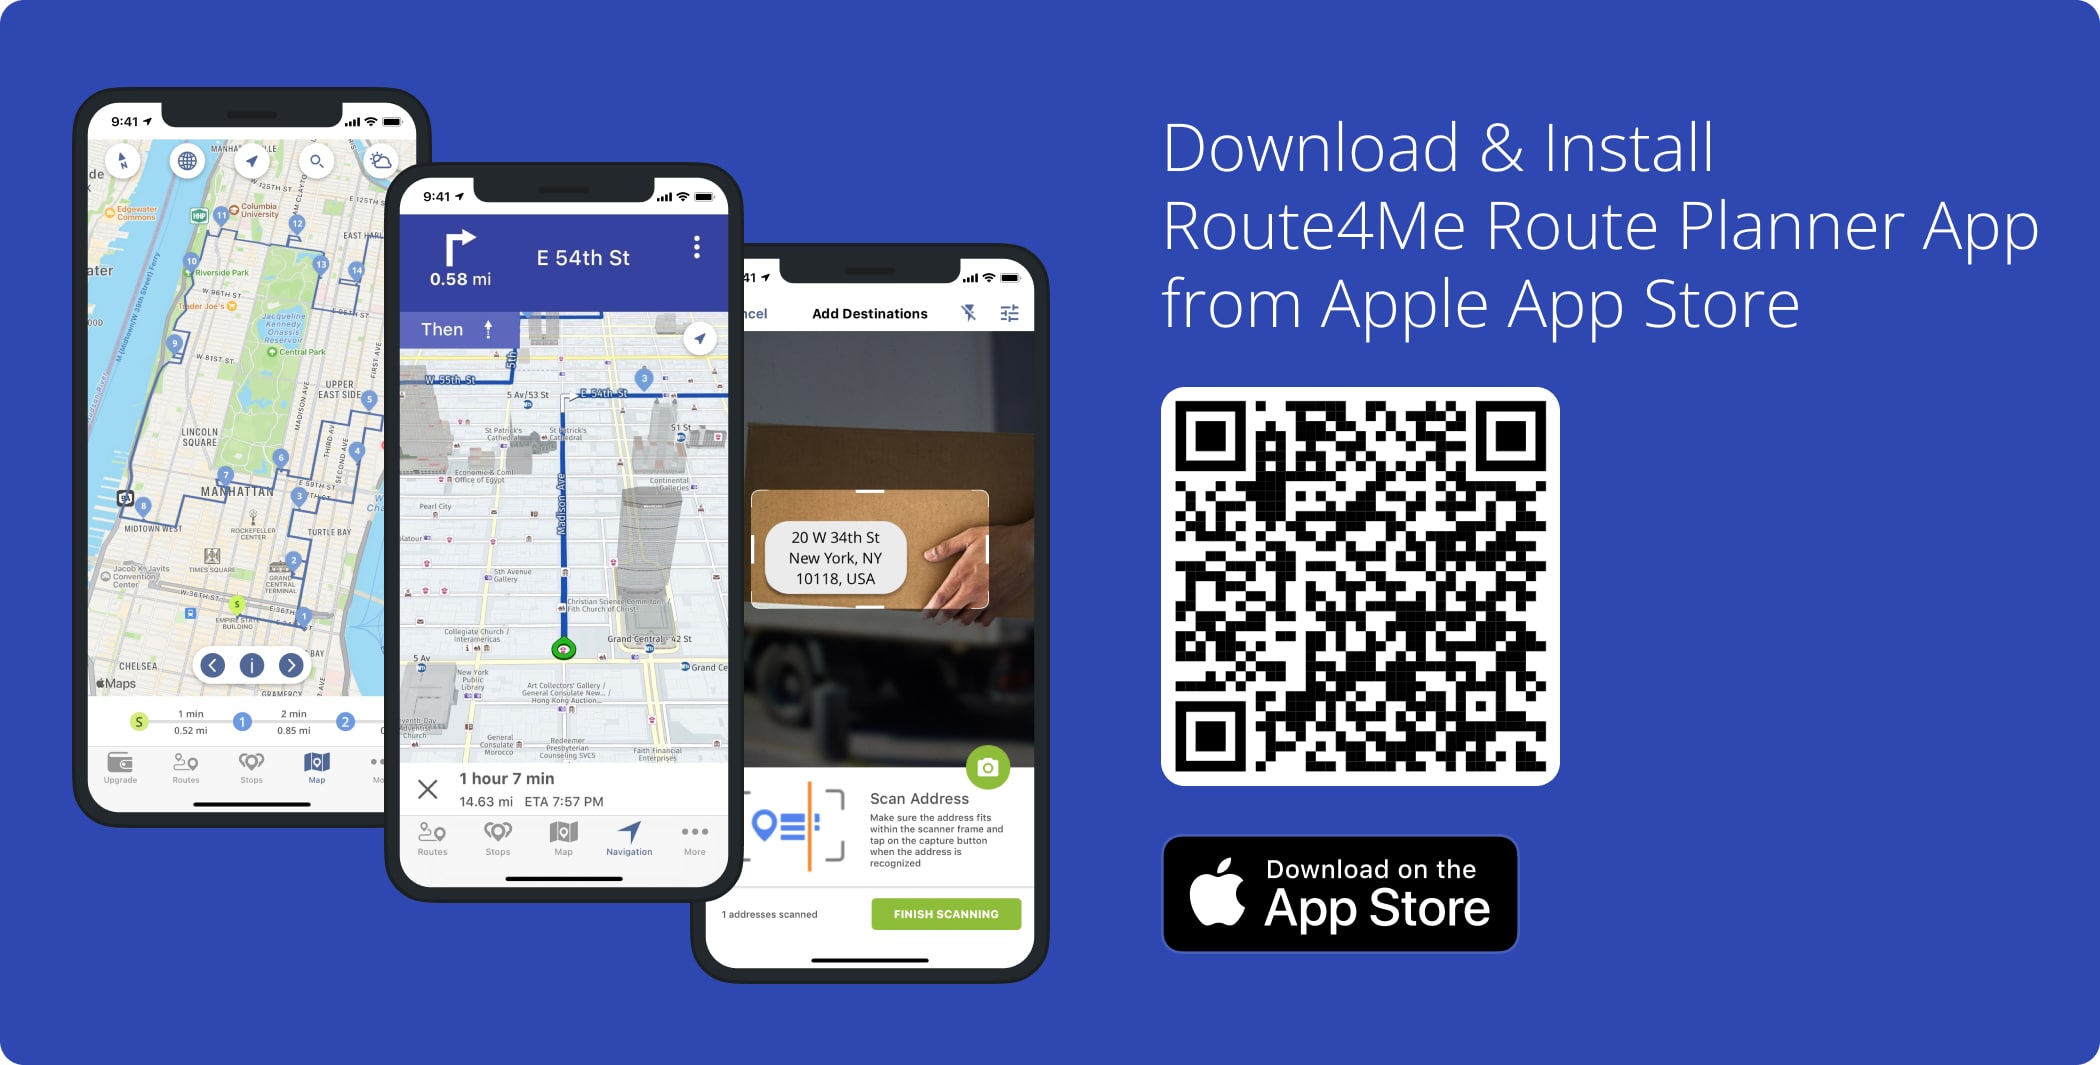 Download and install Route4Me's Mobile Route Planner app on your iPhone or iPad and restore your subscription.